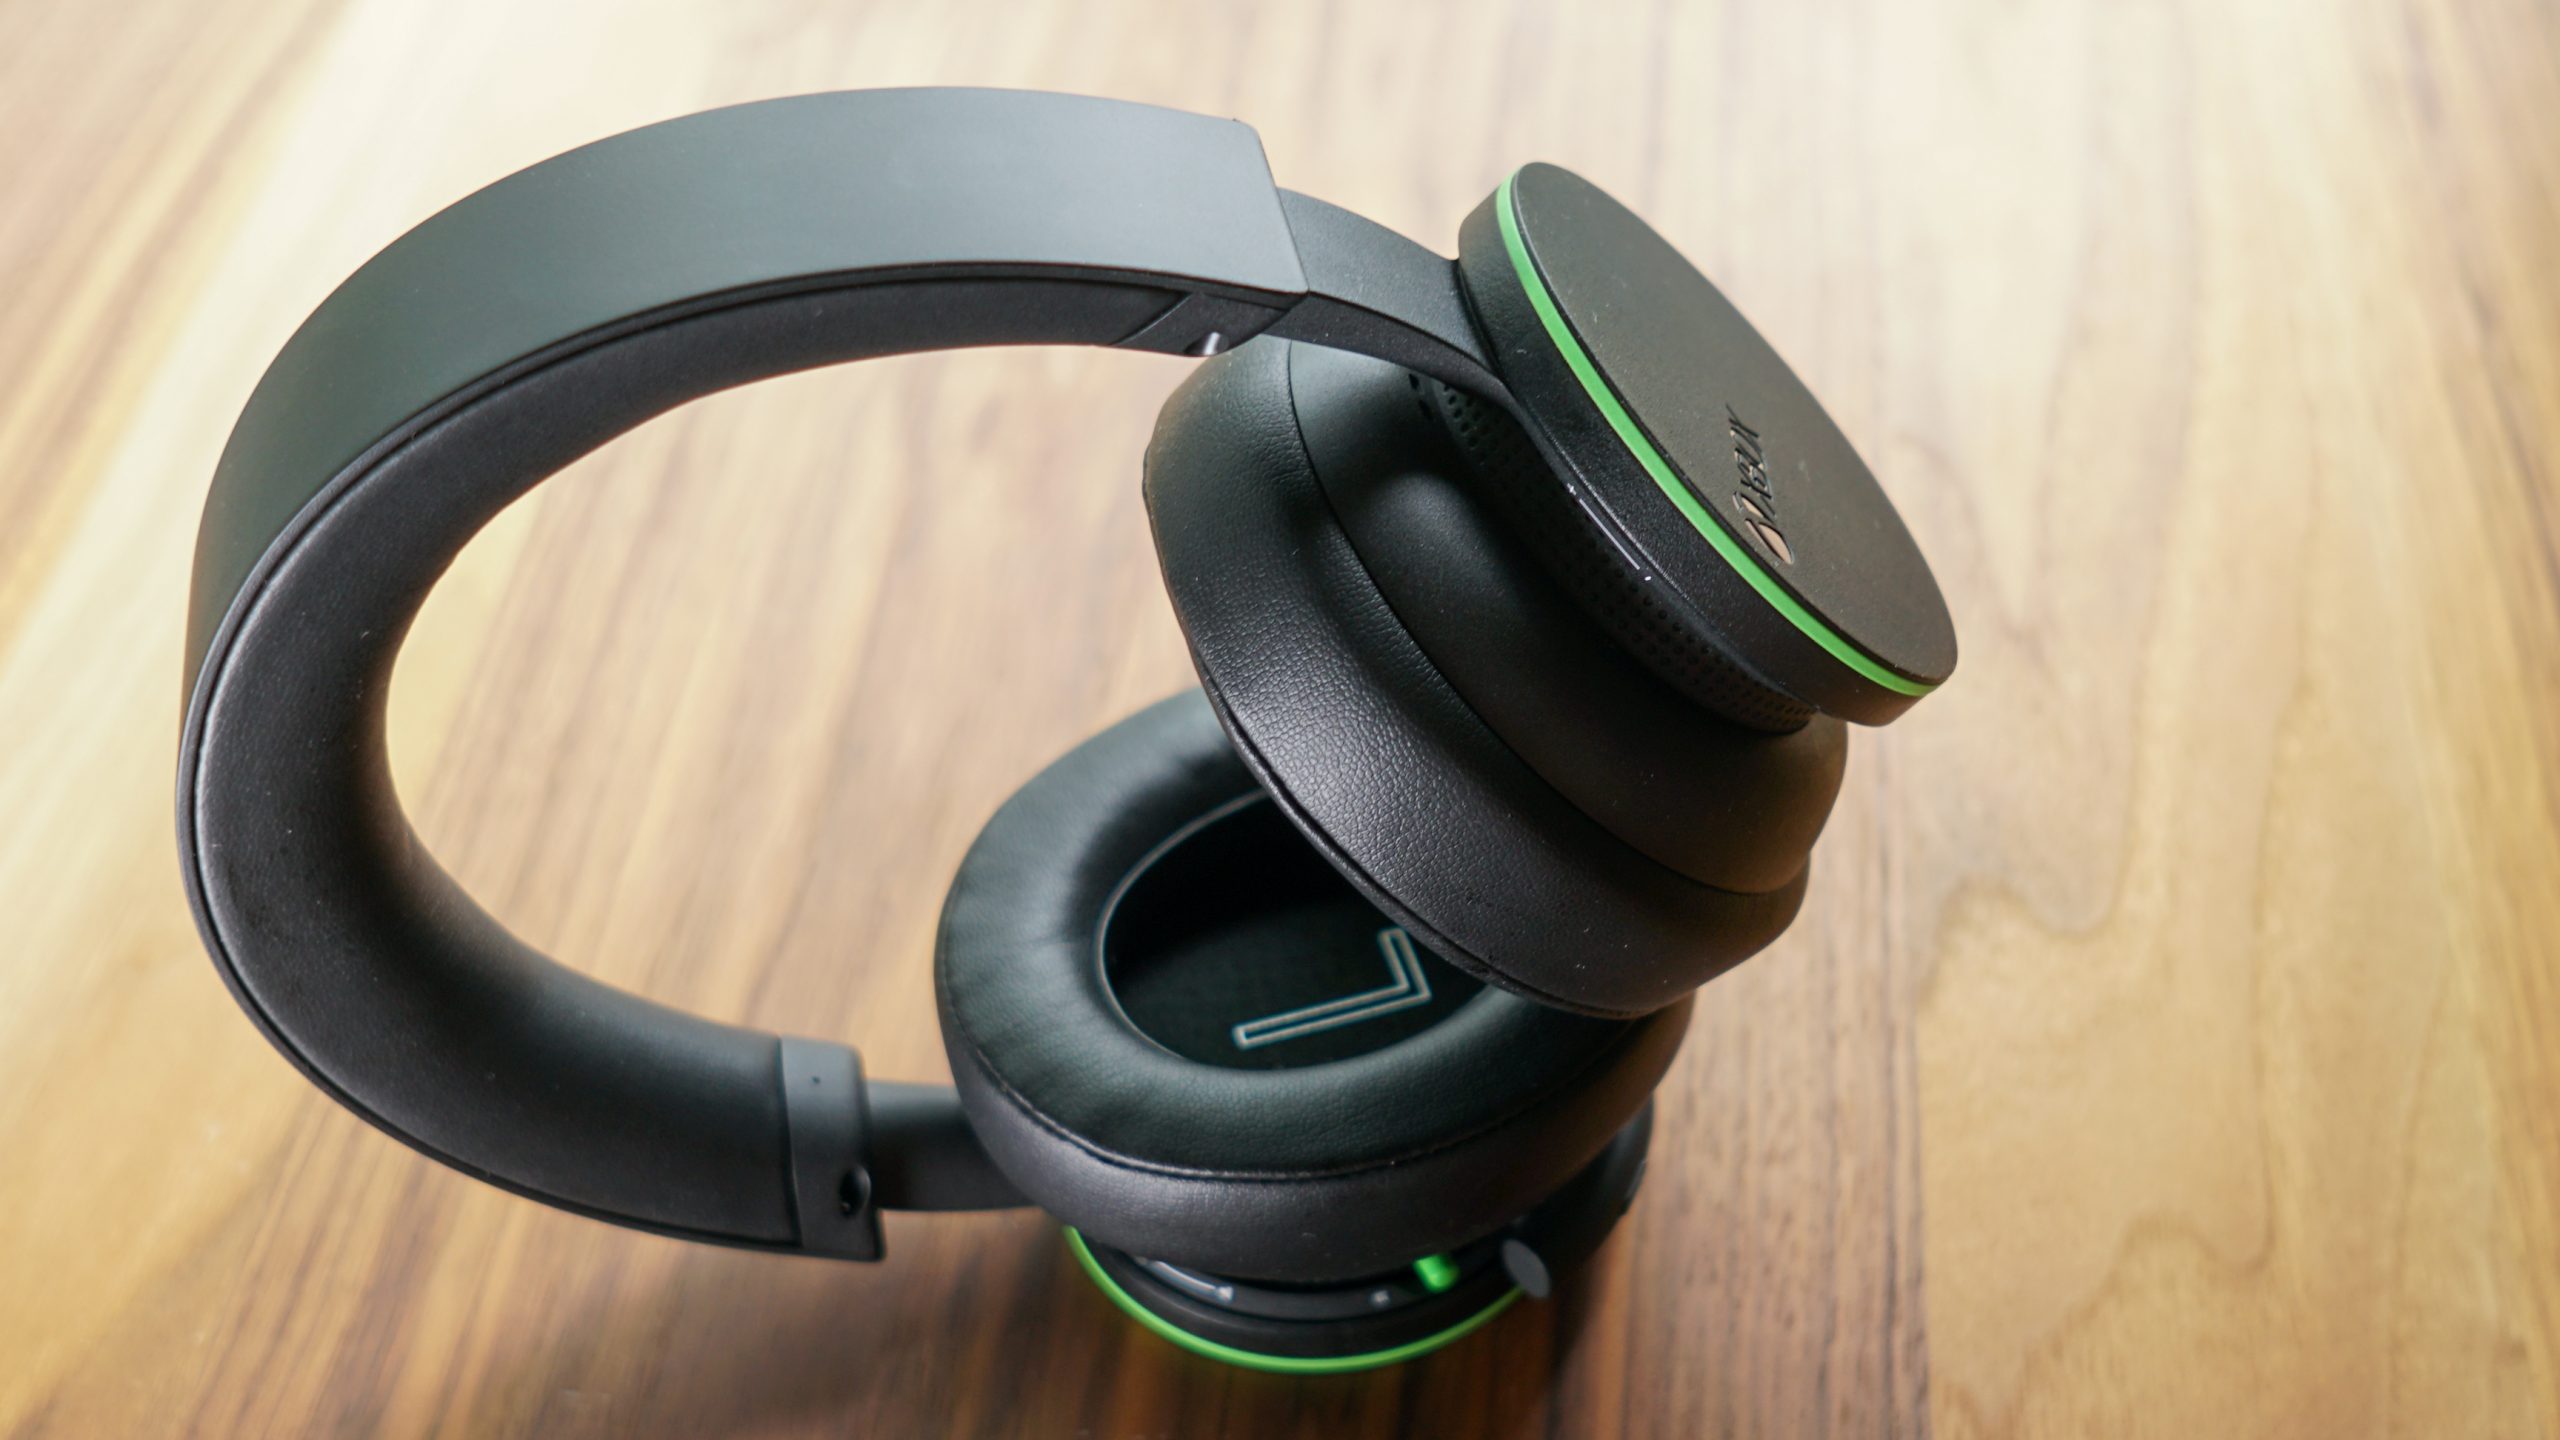 The Microsoft Xbox Wireless Headset sits on a wooden table with its controls displayed.